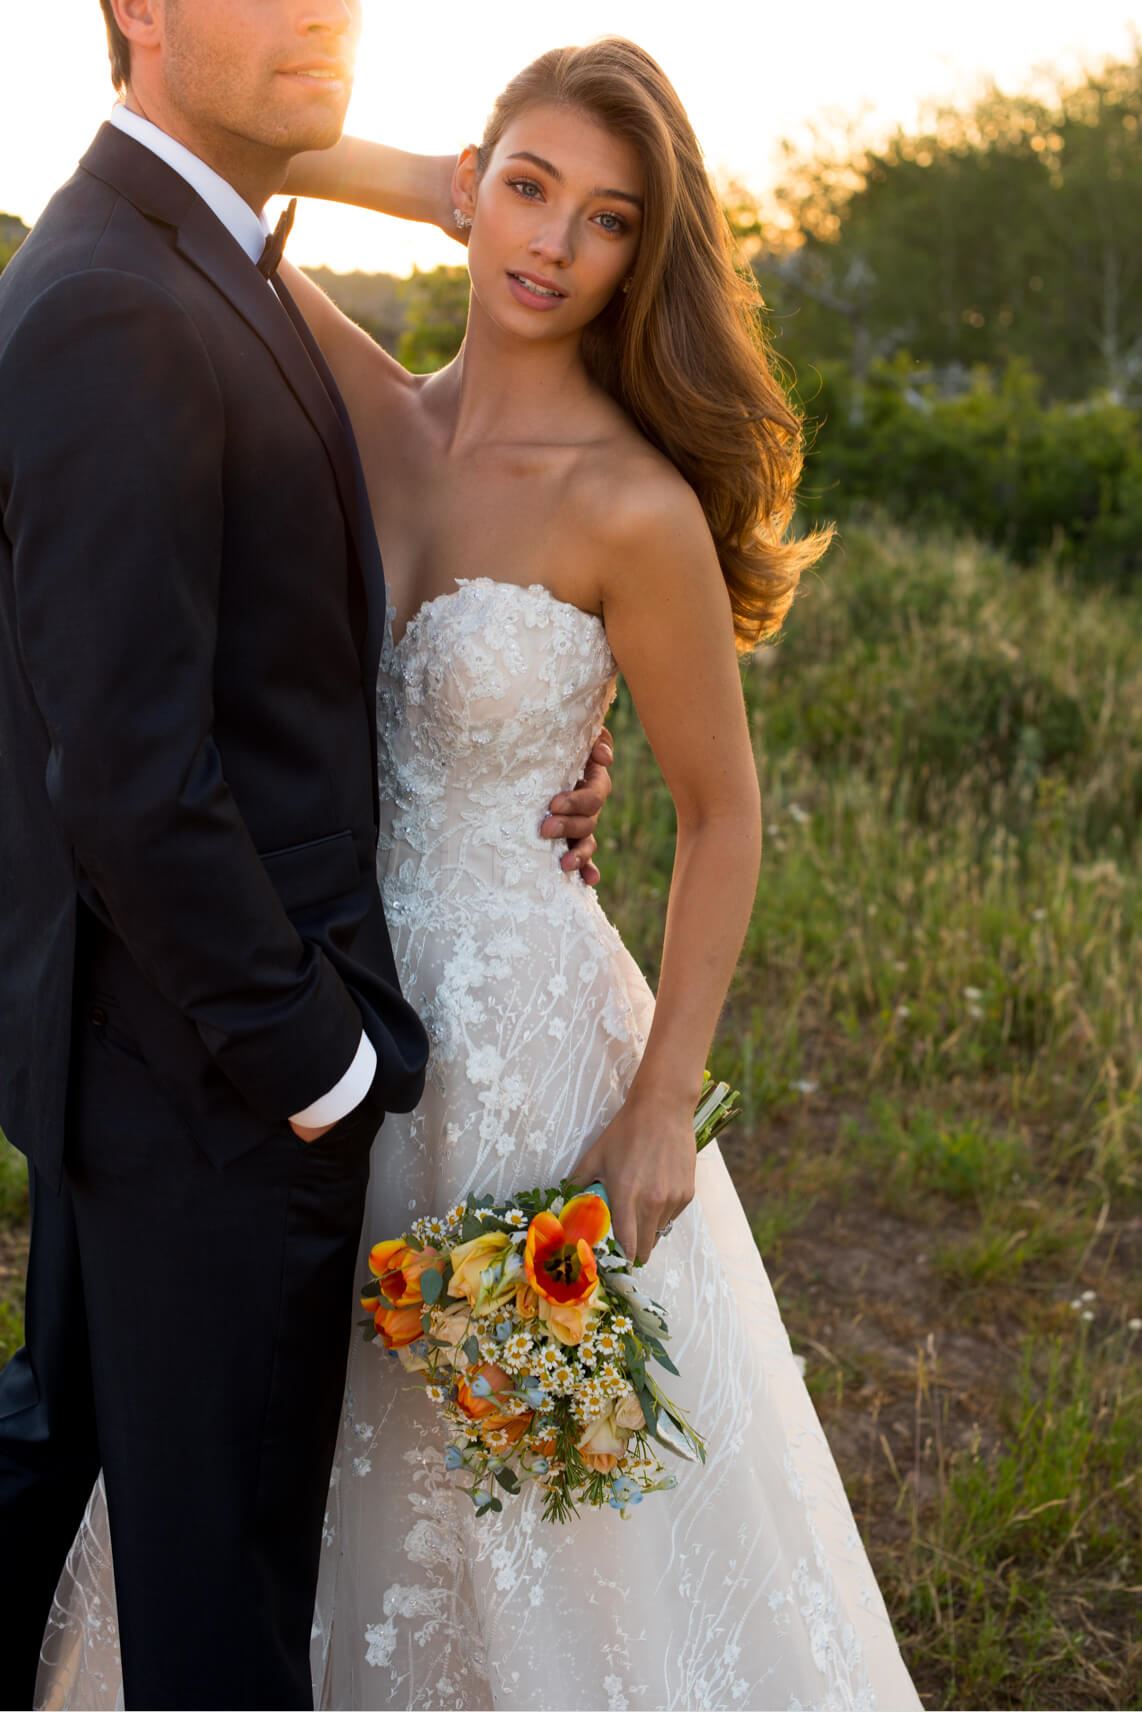 Brunette bride and groom standing together in field